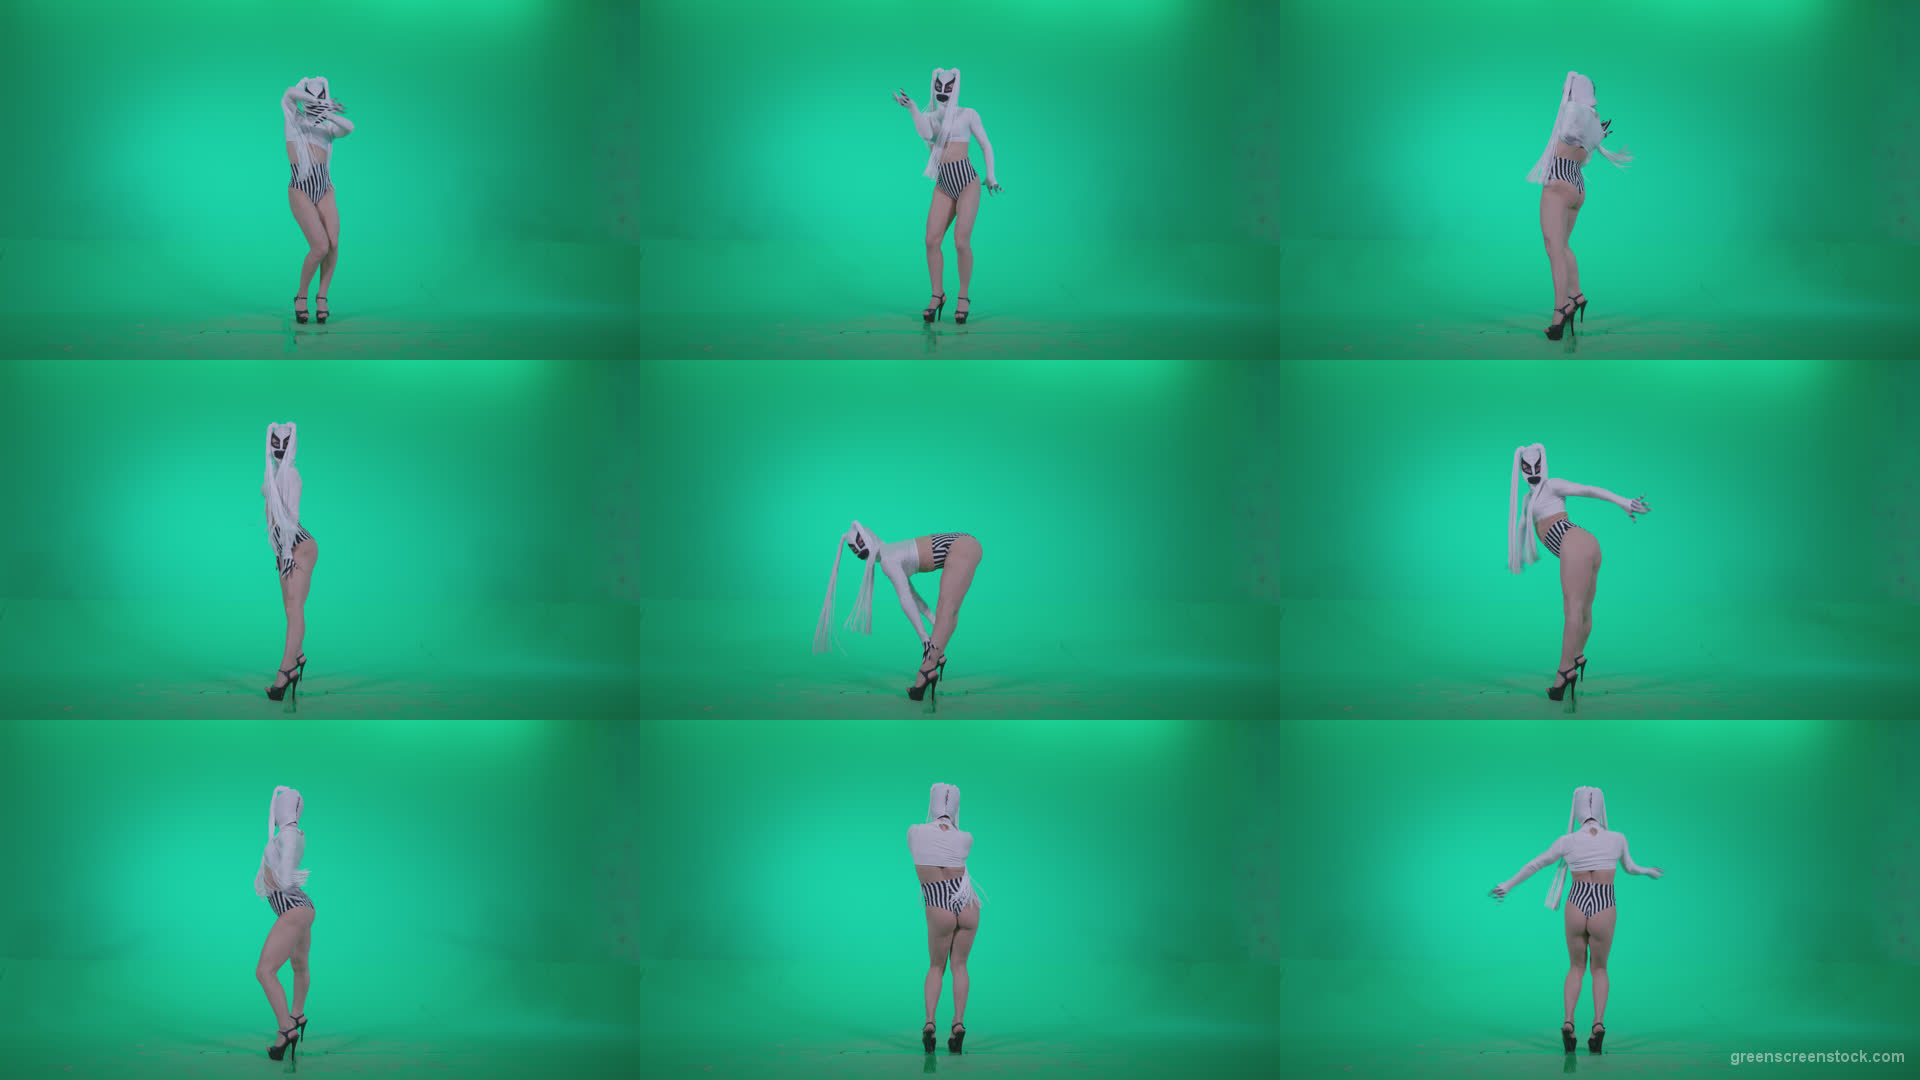 Go-go-Dancer-with-Latex-Top-t2-Green-Screen-Video-Footage Green Screen Stock